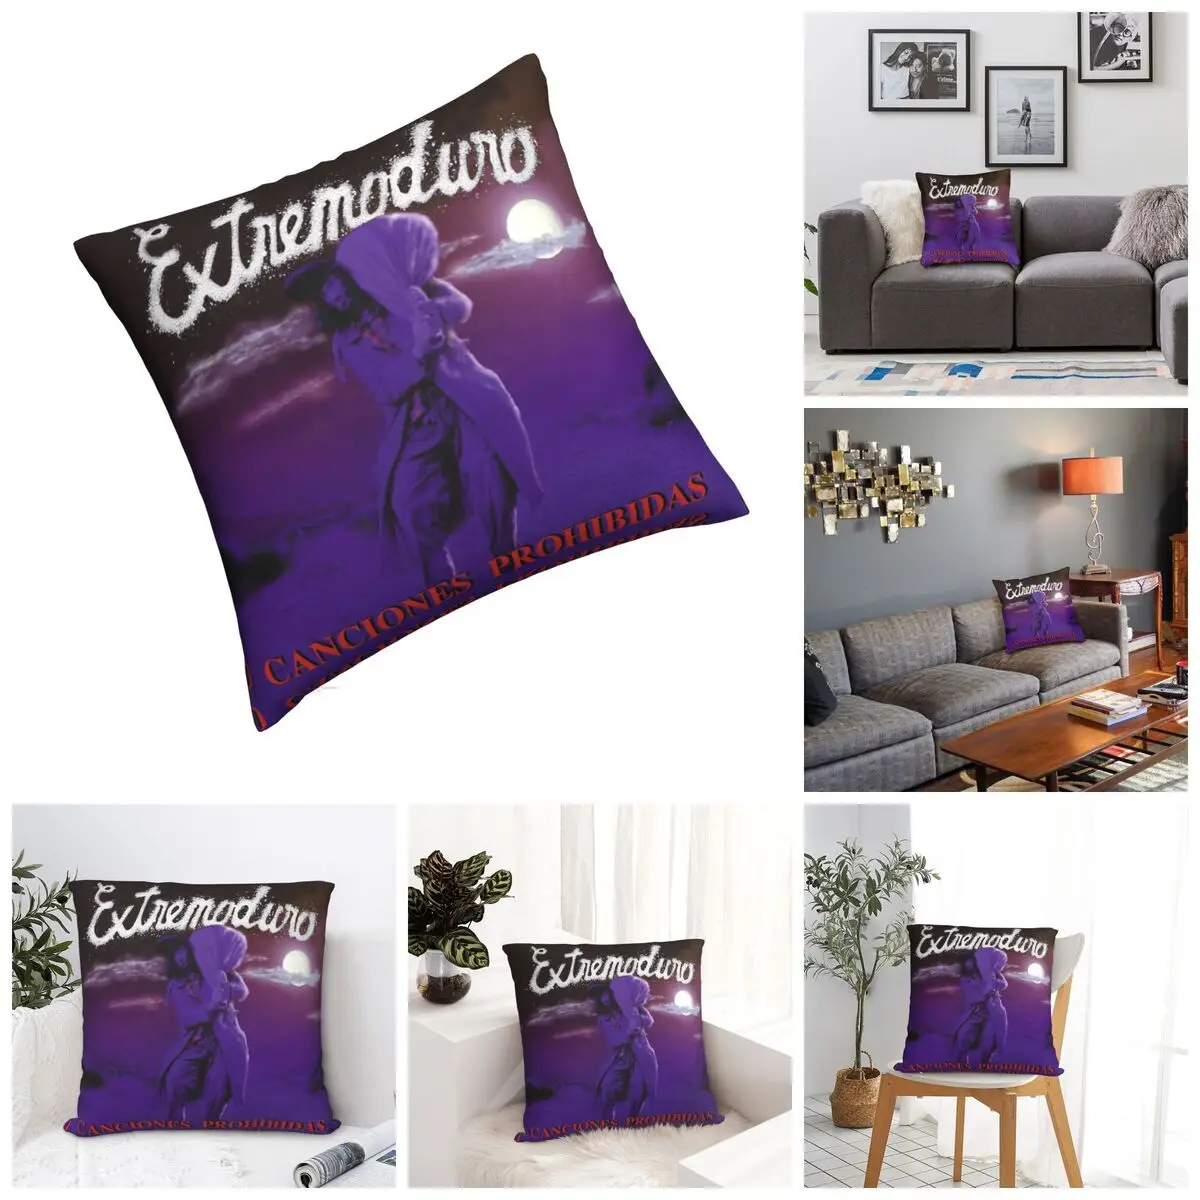 

Promo Extremoduro Canciones Prohibidas Square Pillow Top Quality Weeping Willow Square Pillow Print Funny Sarcastic R251 Bolster